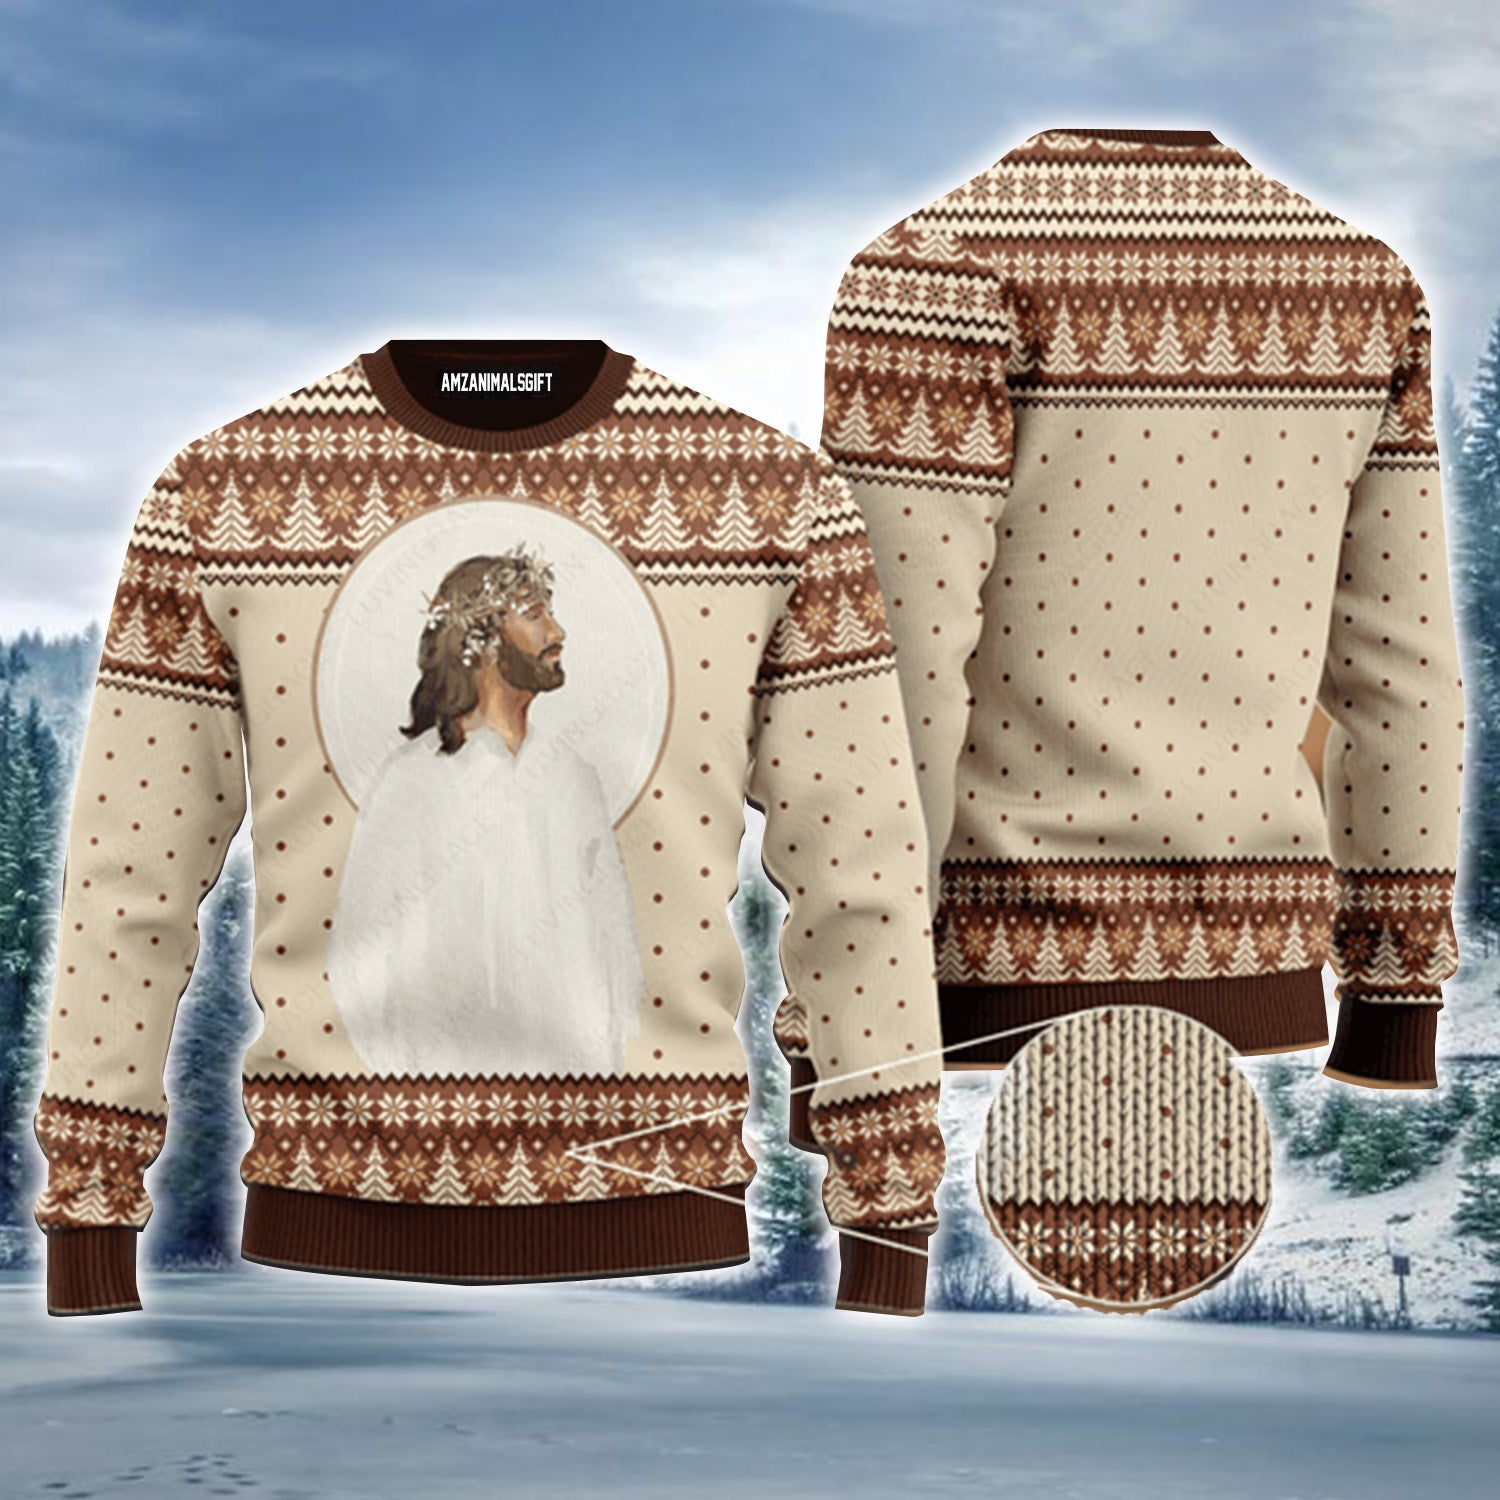 Elegant Vintage Christian, Christmas Pattern Urly Sweater, Christmas Sweater For Men & Women - Perfect Gift For New Year, Winter, Christmas